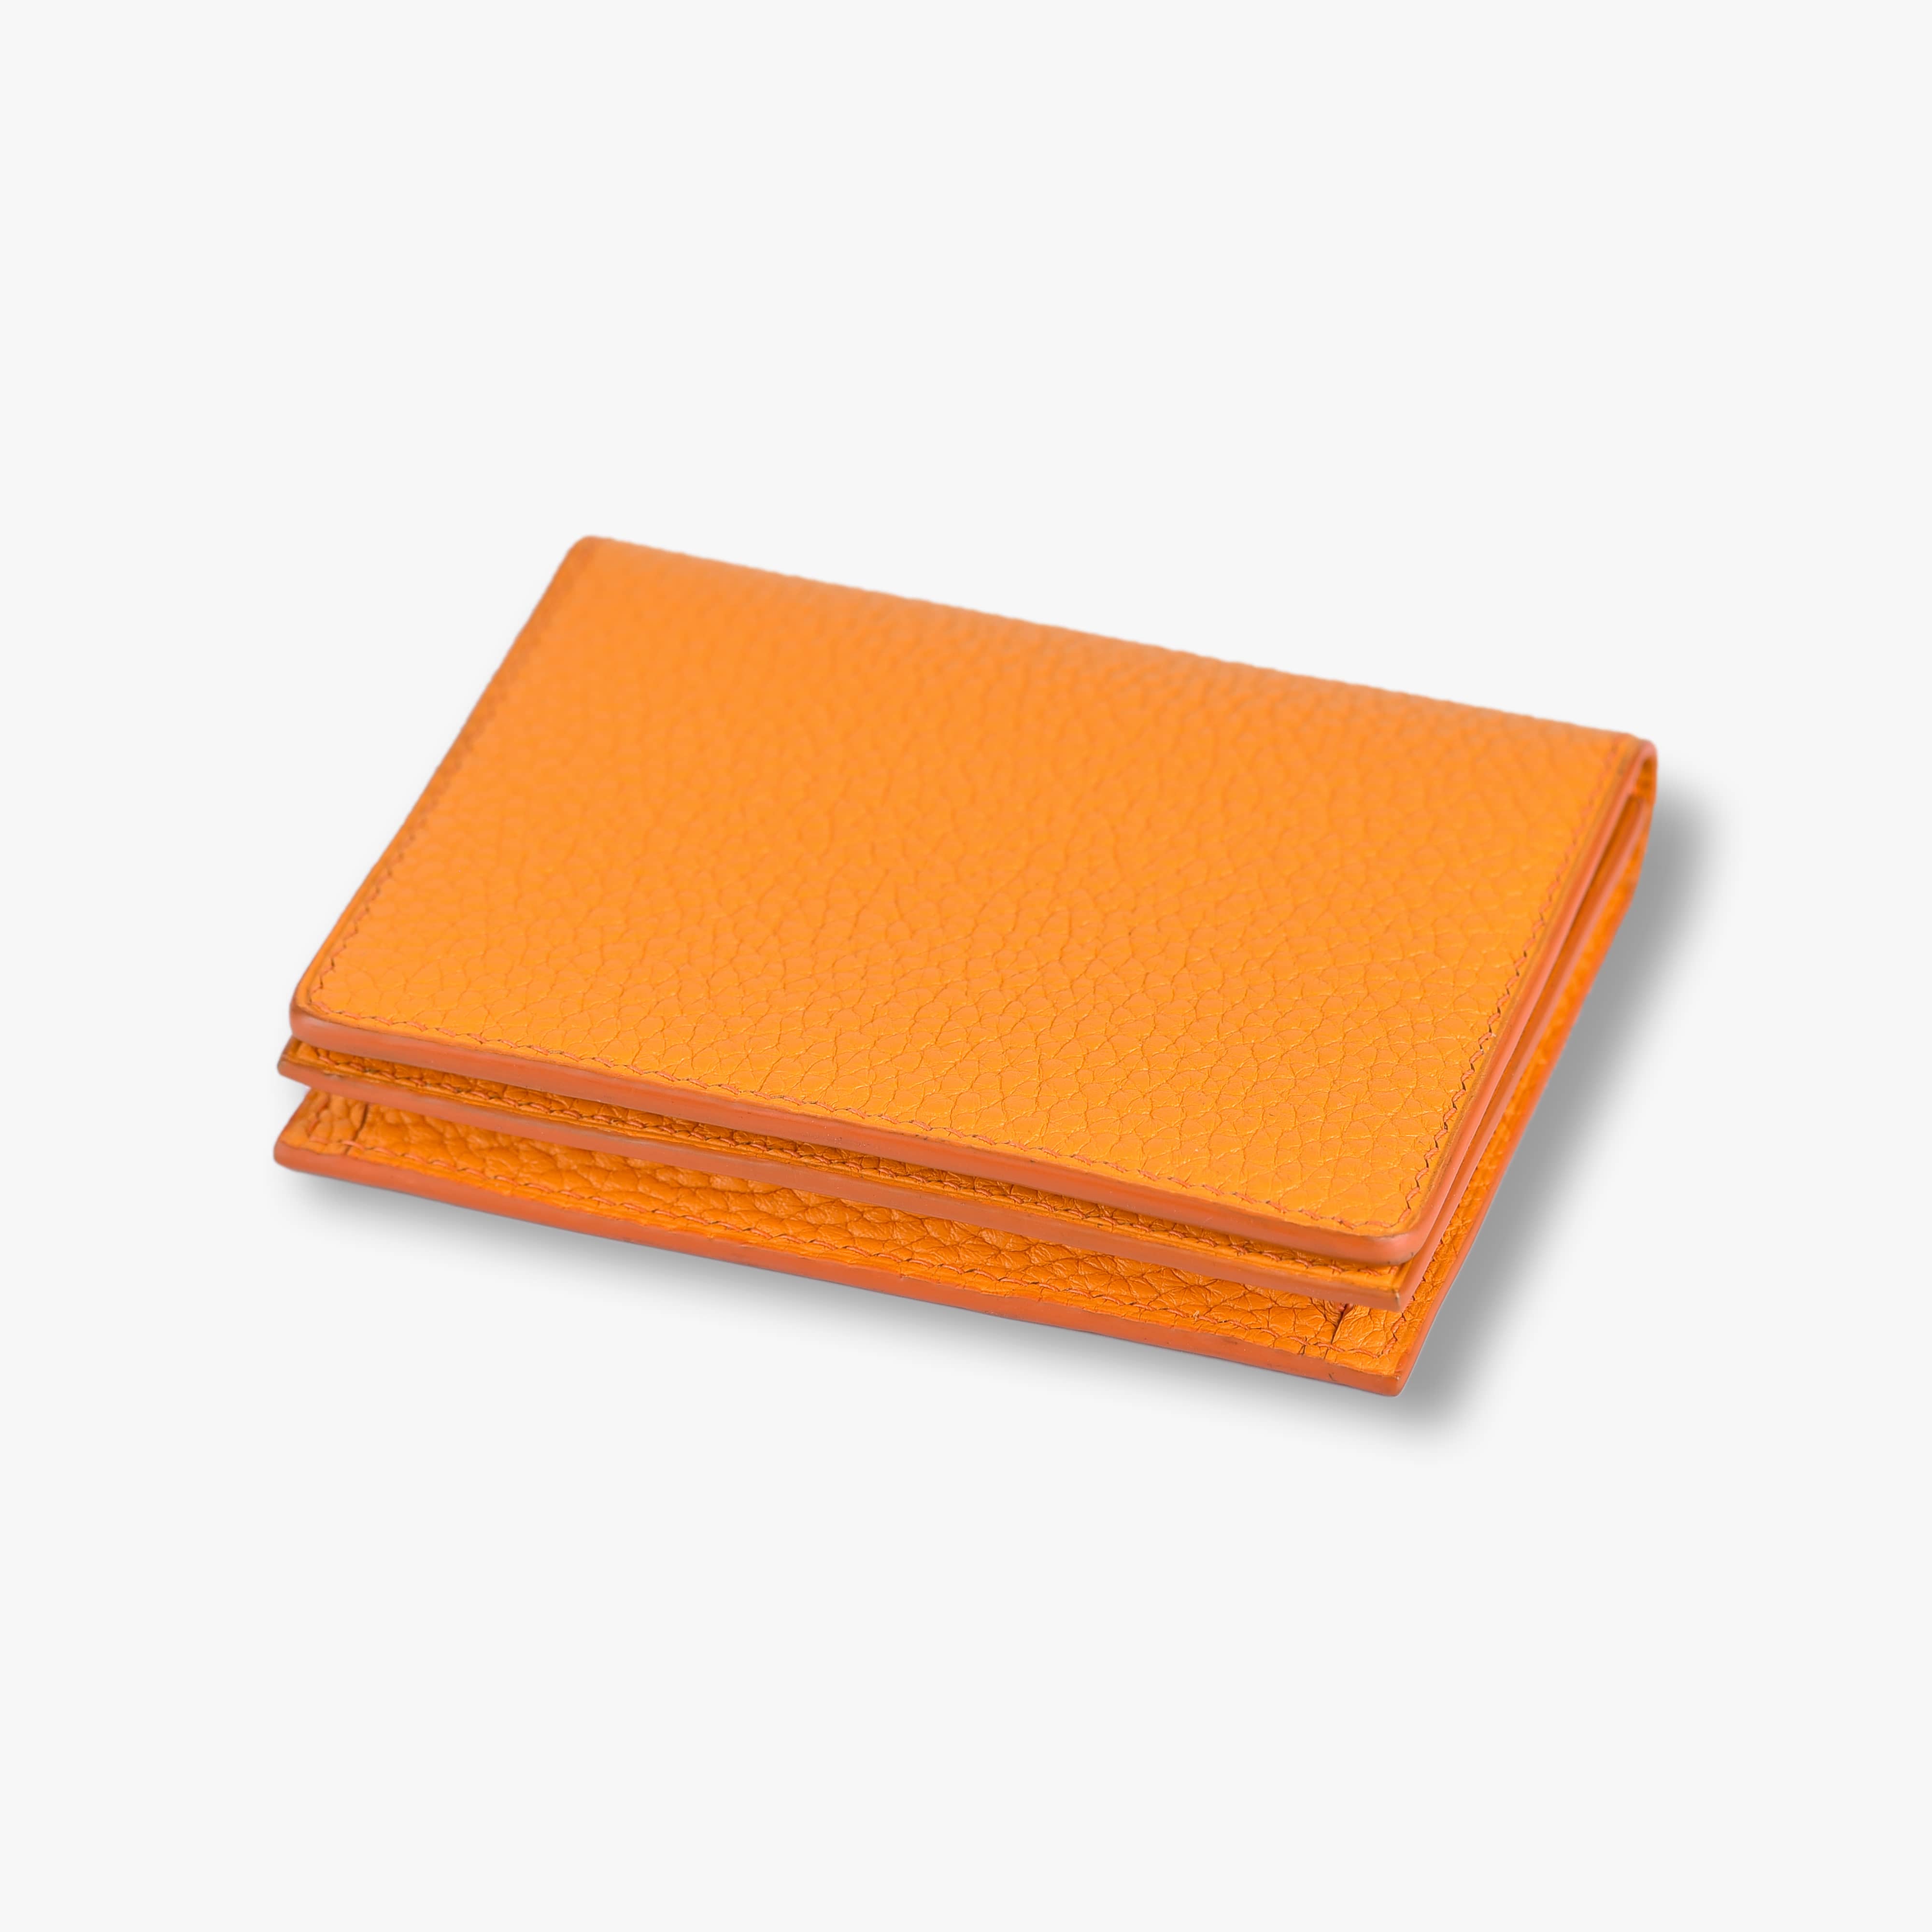 Card holder gâp lịch thiệp BSB Leather Màu Cam BSB1080